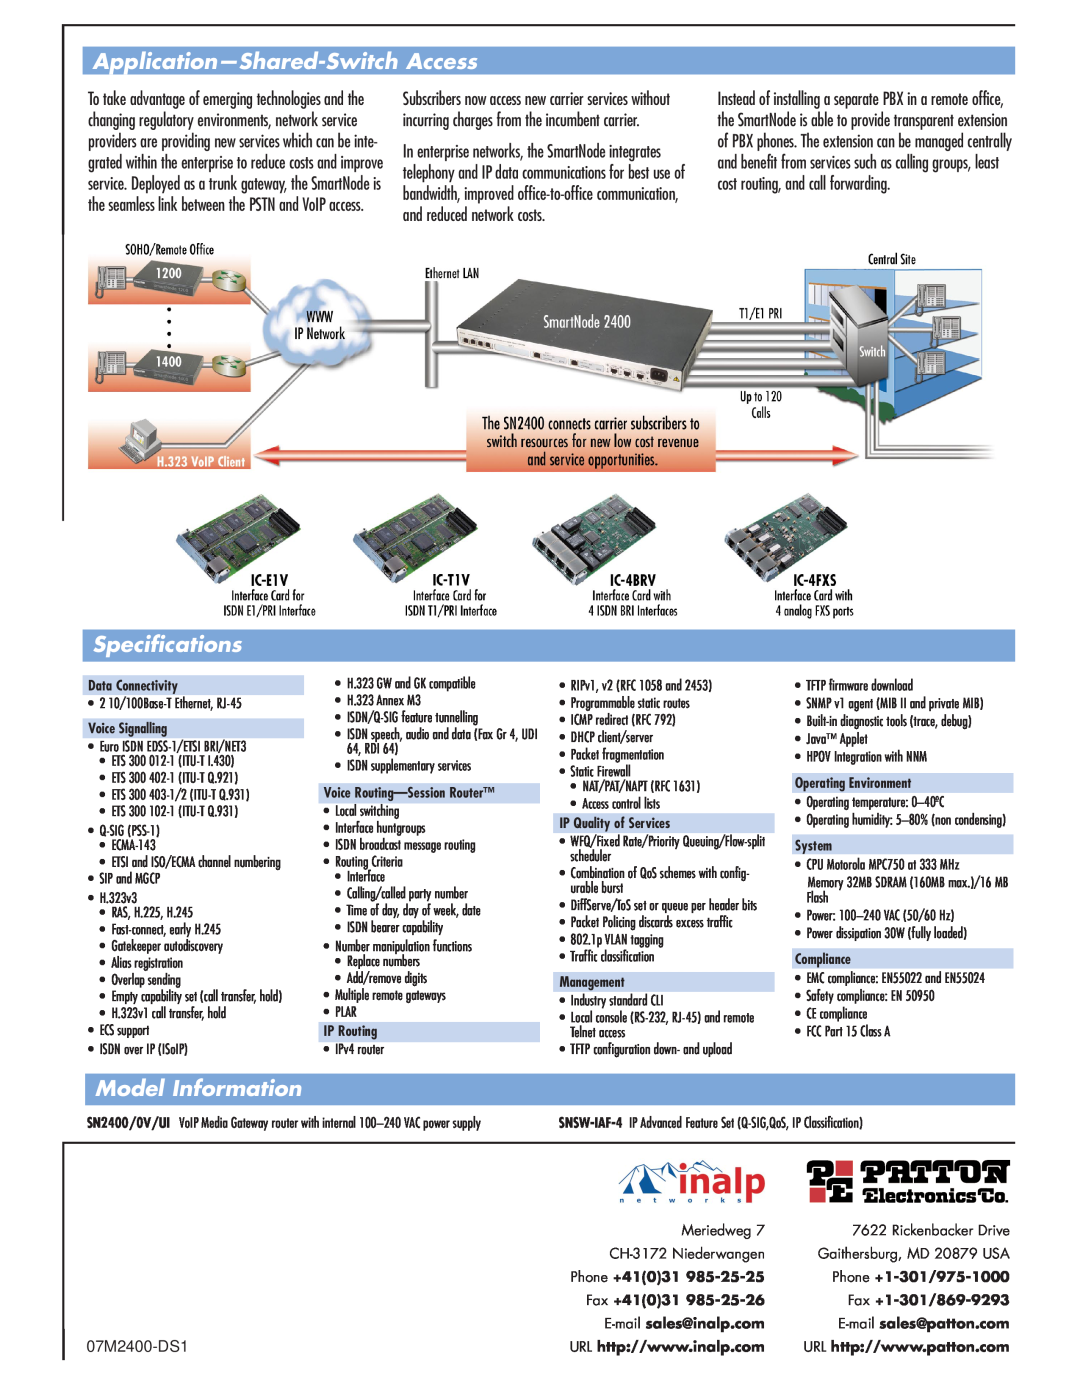 Patton electronic 2400 Series manual Application-Shared-Switch Access, Specifications, Model Information, 07M2400-DS1 